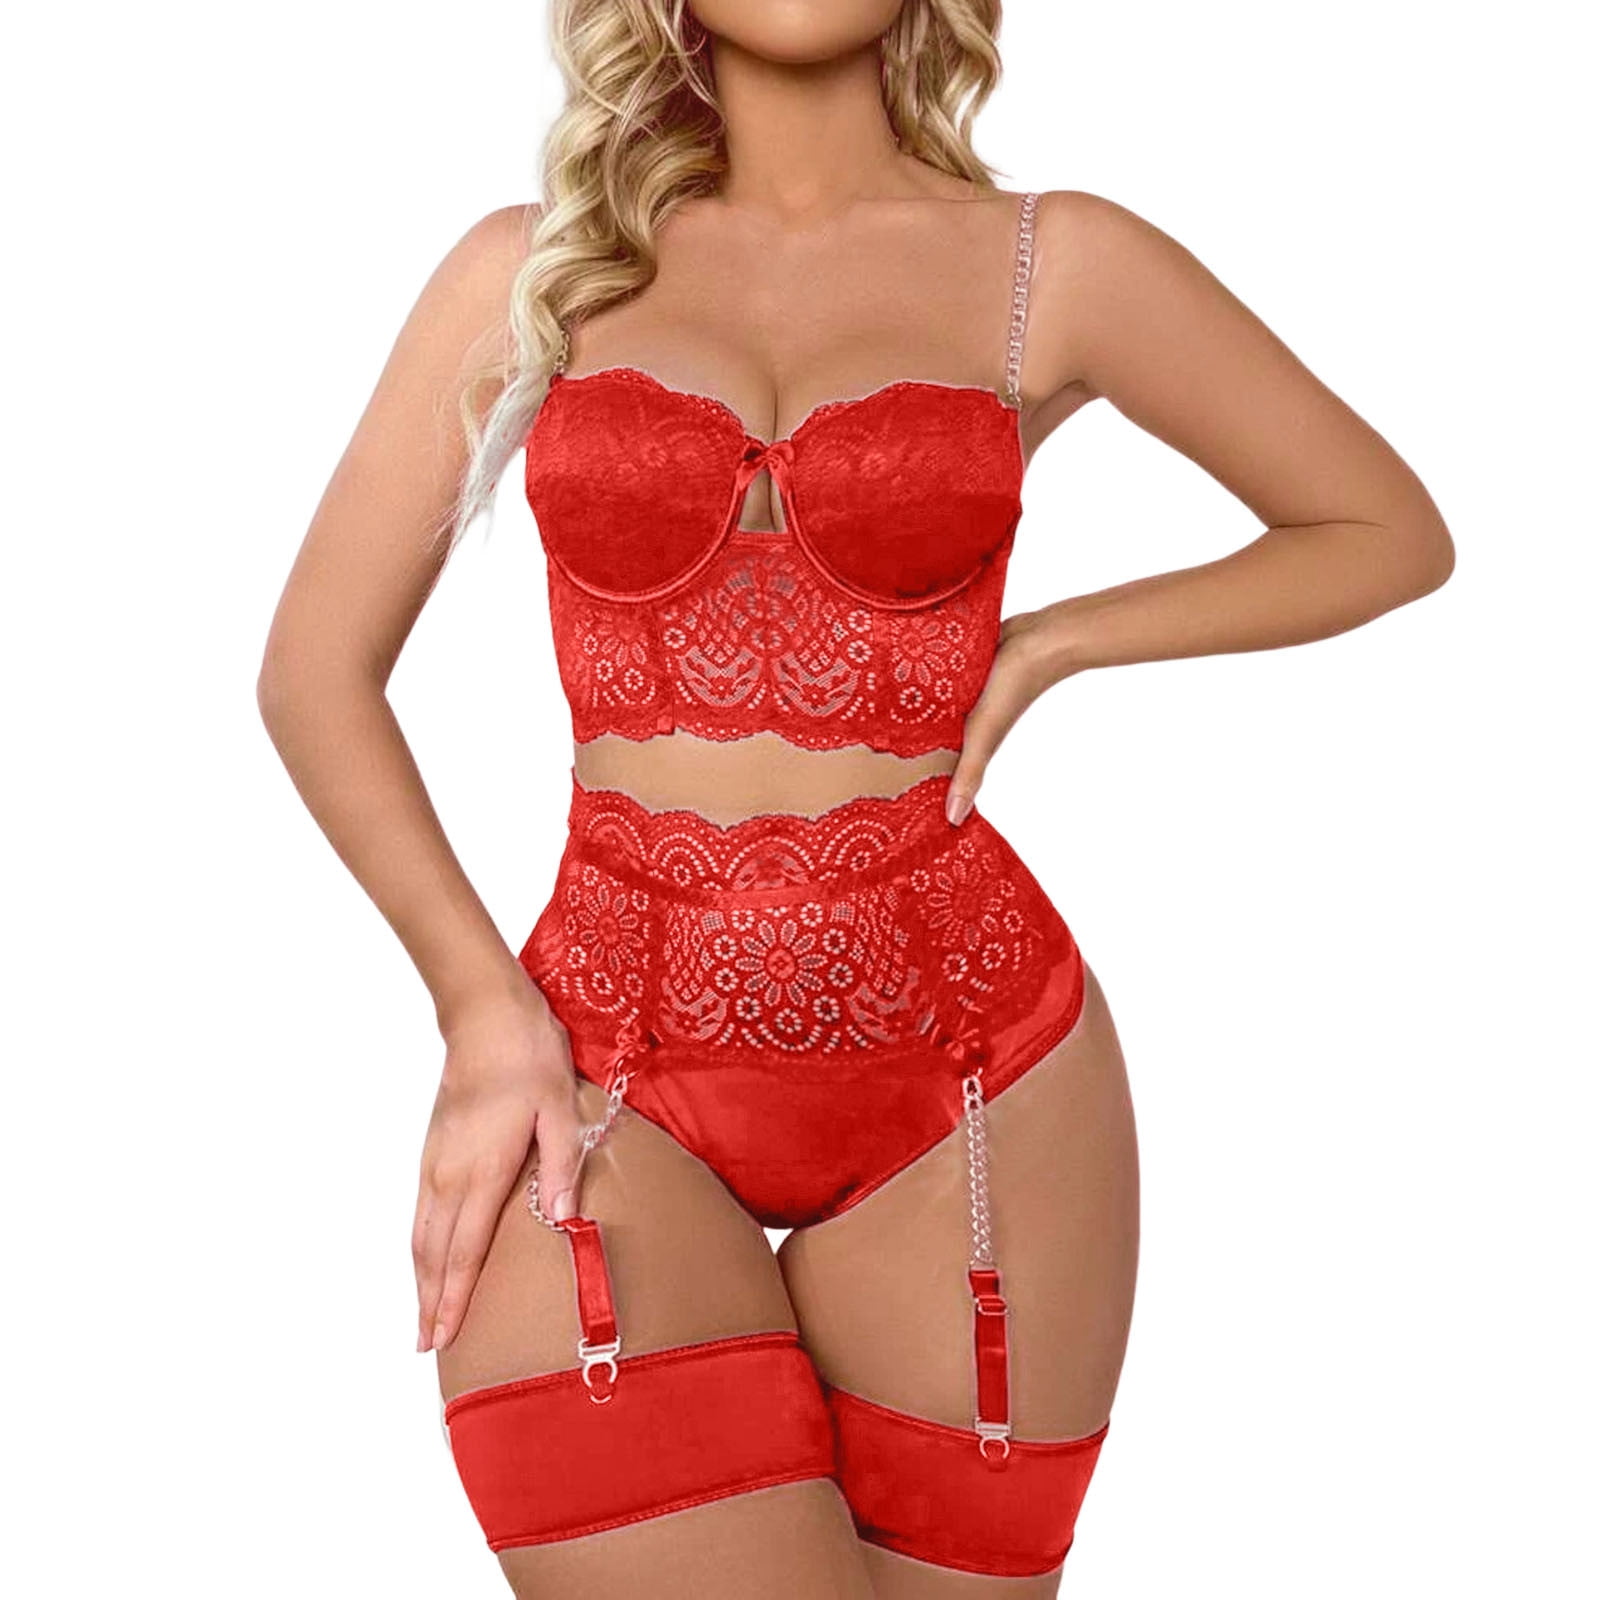 PMUYBHF Women Lingerie Lace Crochet Cutout Embroidery Bra and High Waist  Panty Set Push Up Sets Athartle Bodysuit Lingerie for Women with Stockings  Womens Boy Shorts underwear Seamless Cotton 